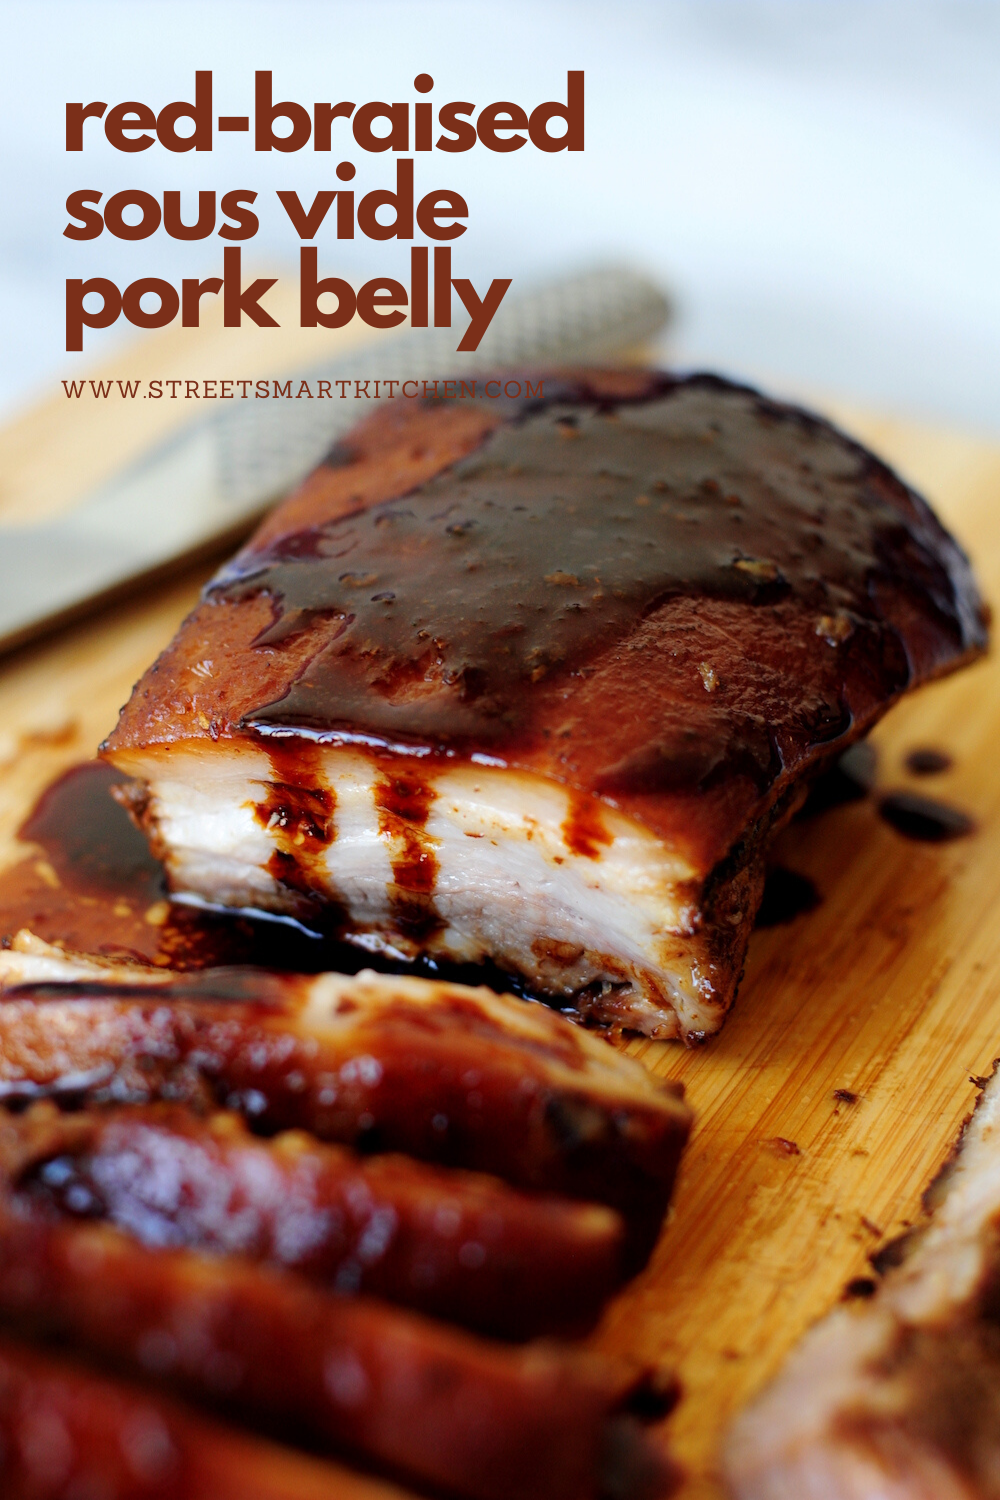 Red-braised sous vide pork belly, a traditional classic Chinese recipe turned revolutionarily simple with the original melt-in-your-mouth texture and the authentic flavors!